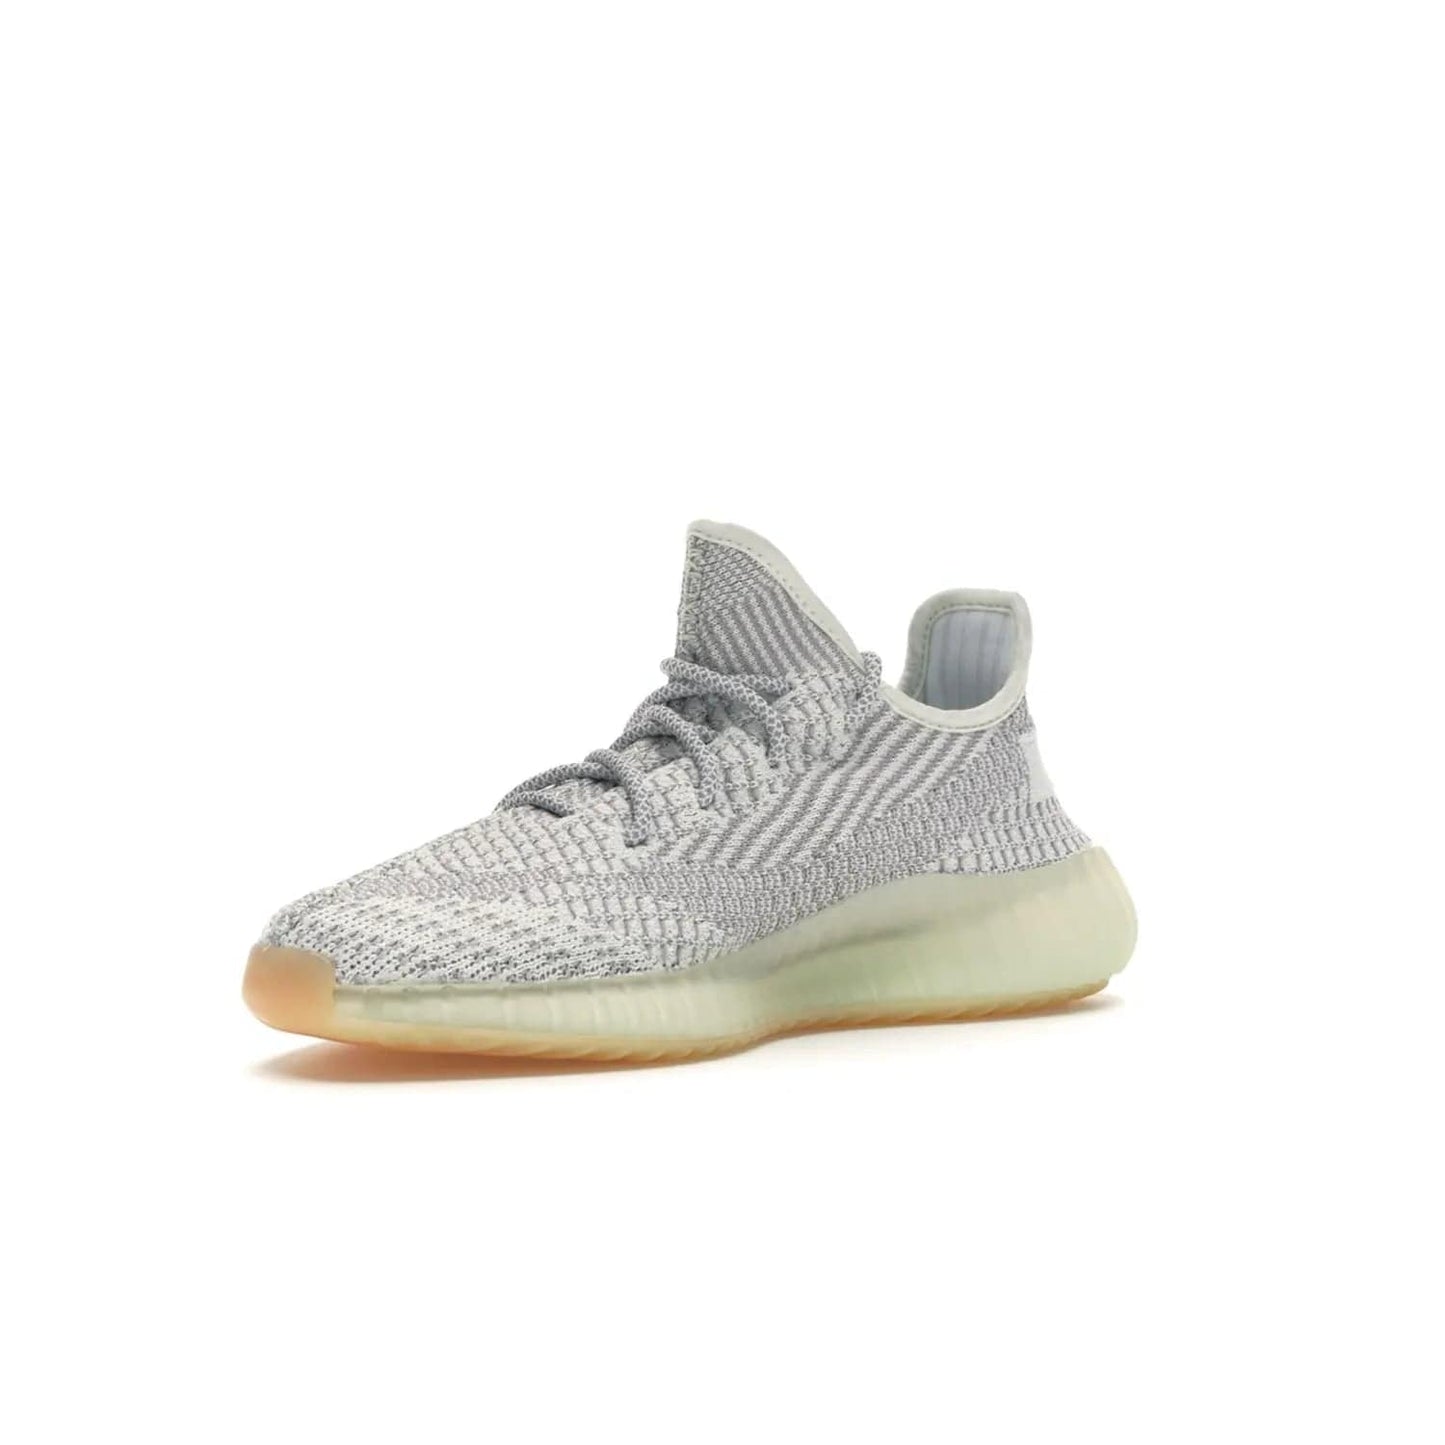 adidas Yeezy Boost 350 V2 Yeshaya (Non-Reflective) - Image 15 - Only at www.BallersClubKickz.com - Step out in style with the adidas Yeezy Boost 350 V2 Yeshaya (Non-Reflective). Gray-and-white Primeknit upper with mesh side stripe & rope laces, plus a translucent Boost sole with a hint of yellow. Make a statement and feel comfortable with this stylish sneaker.